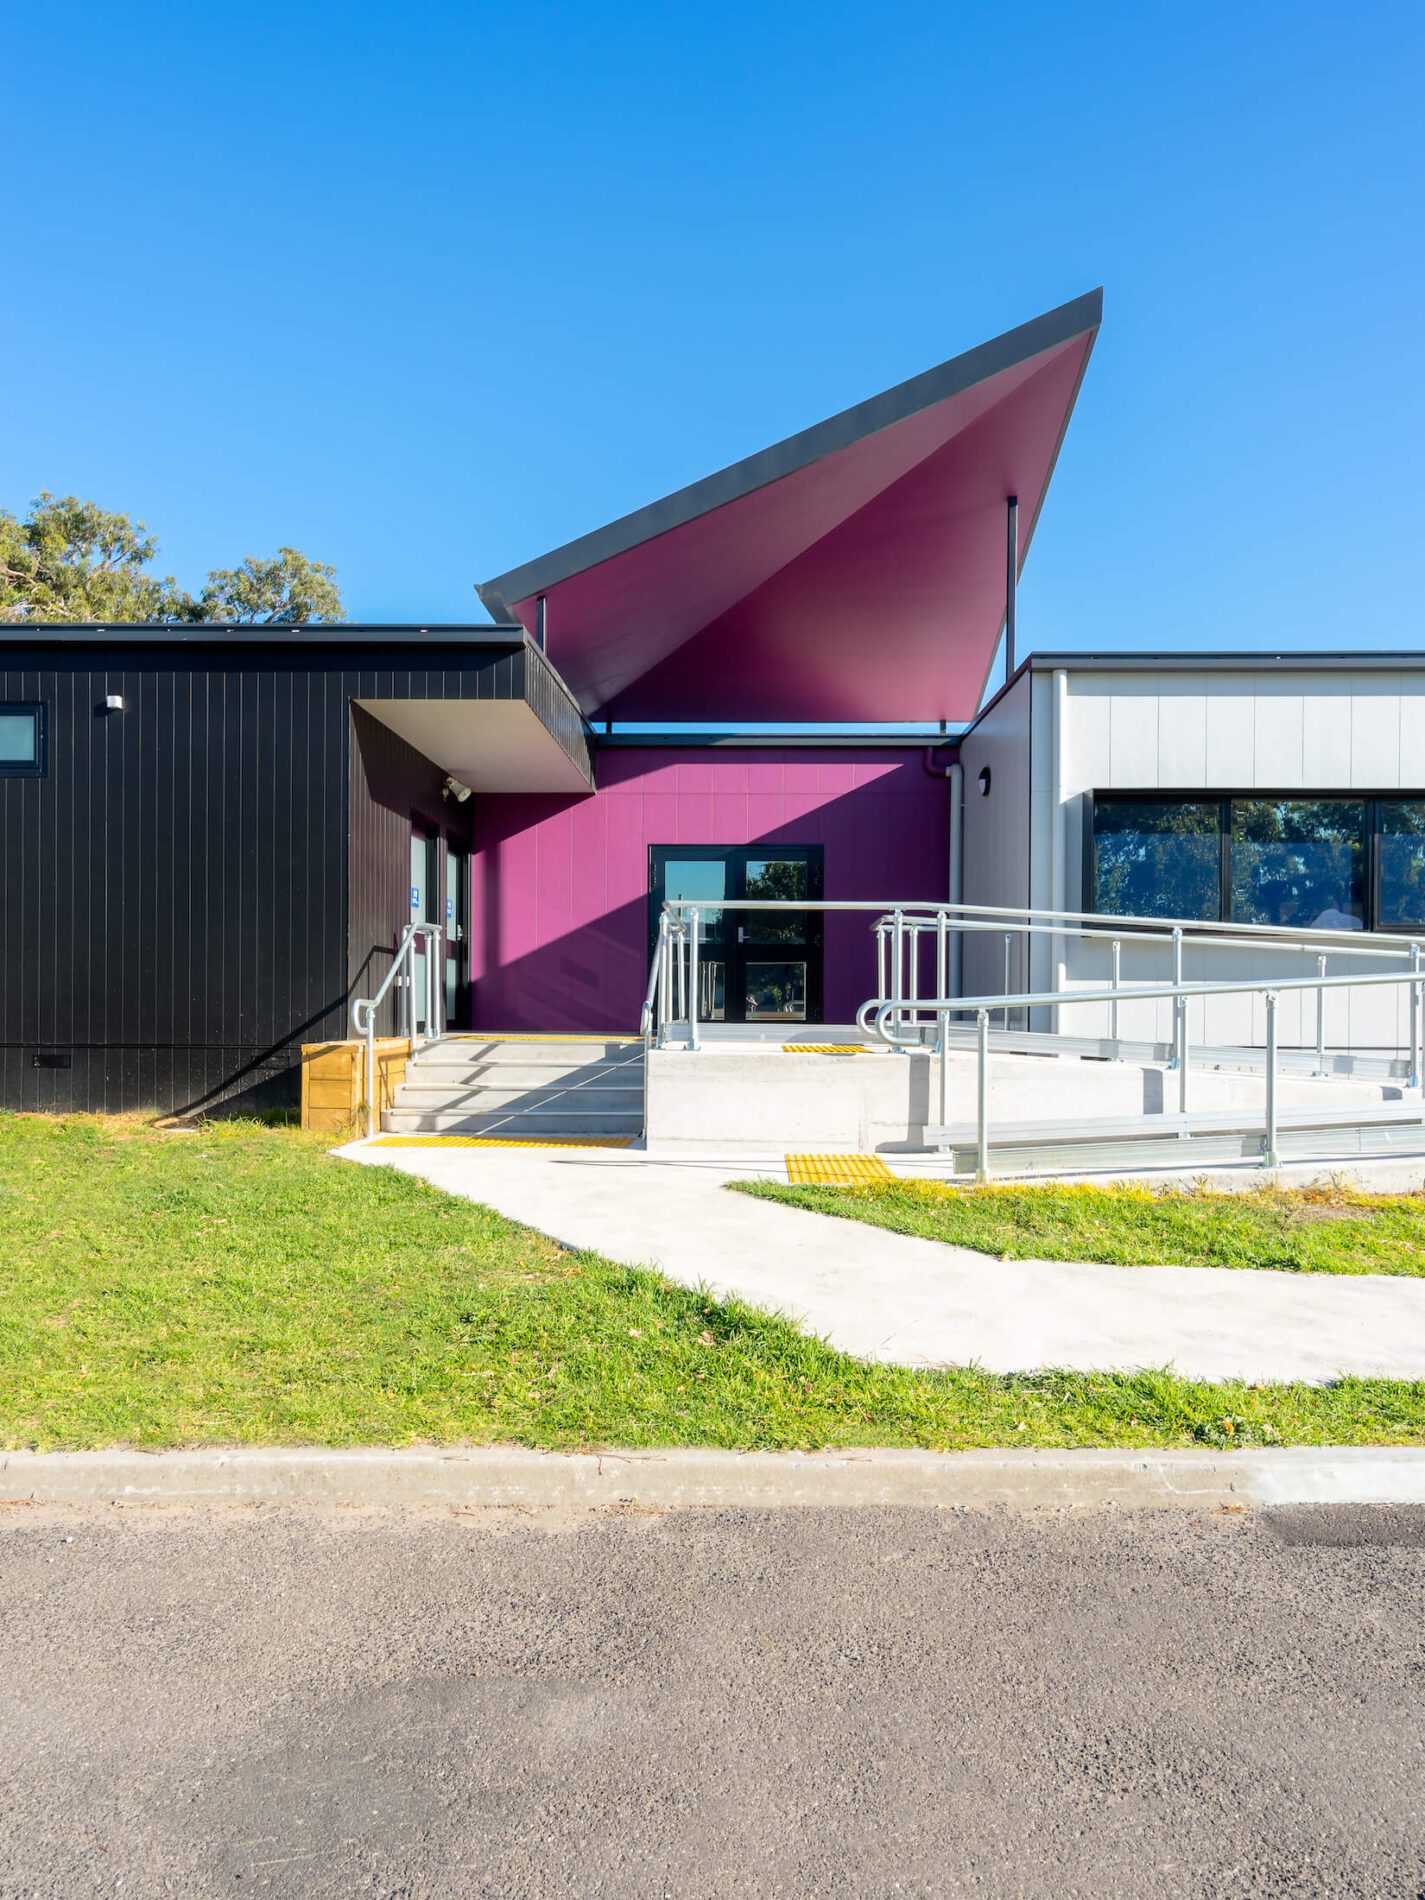 Permanent modular school building entry with purple angular canopy